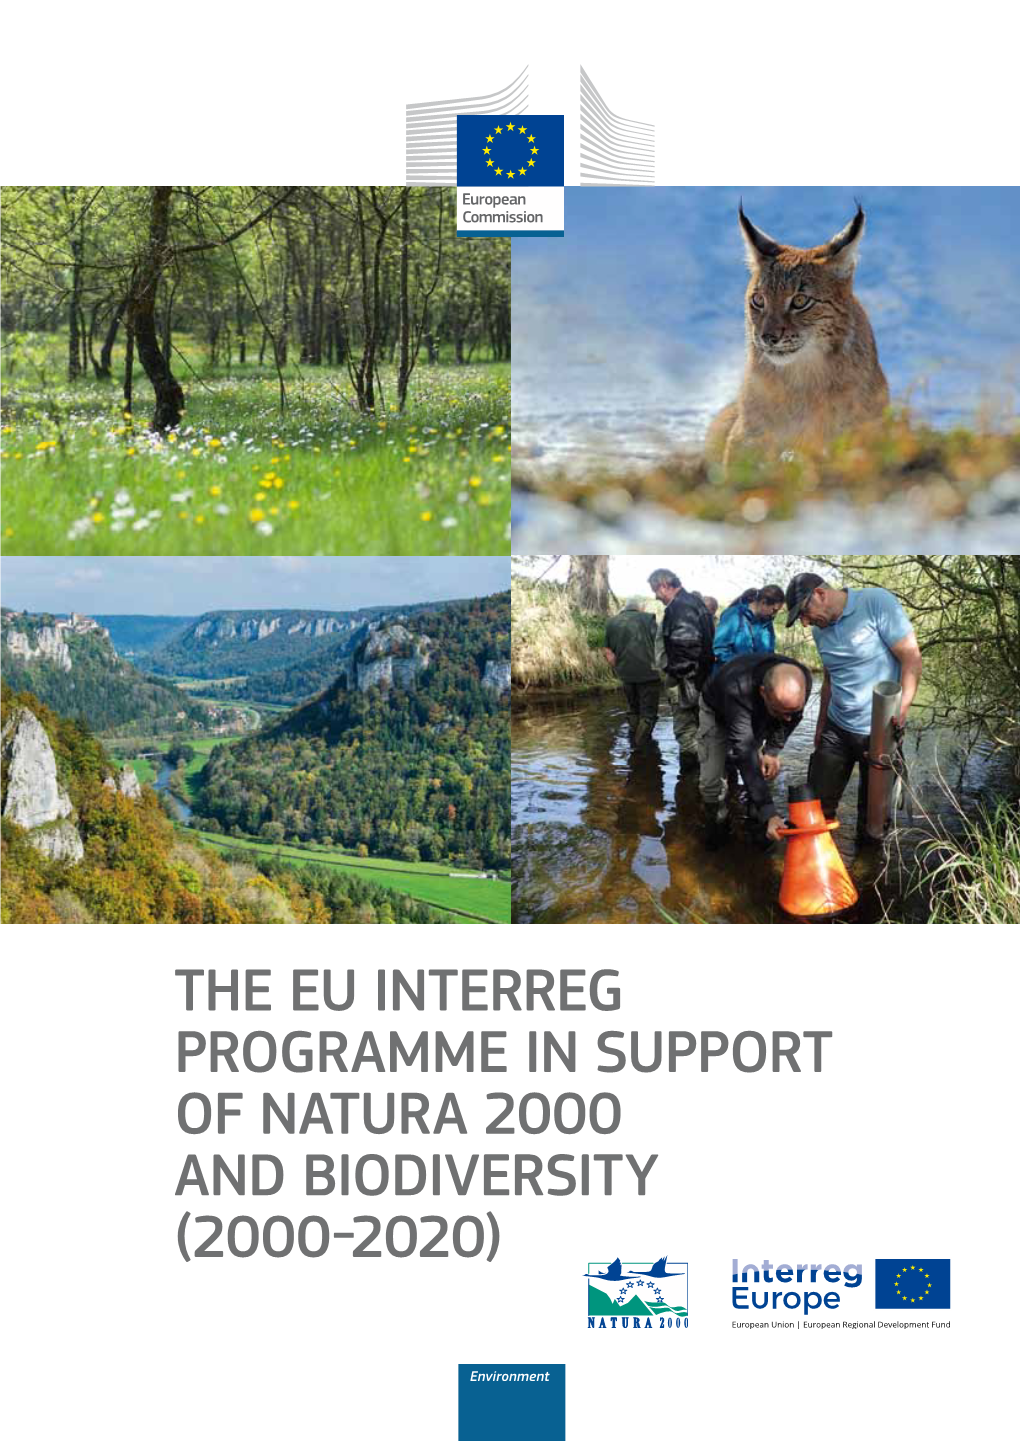 The Eu Interreg Programme in Support of Natura 2000 and Biodiversity (2000-2020)